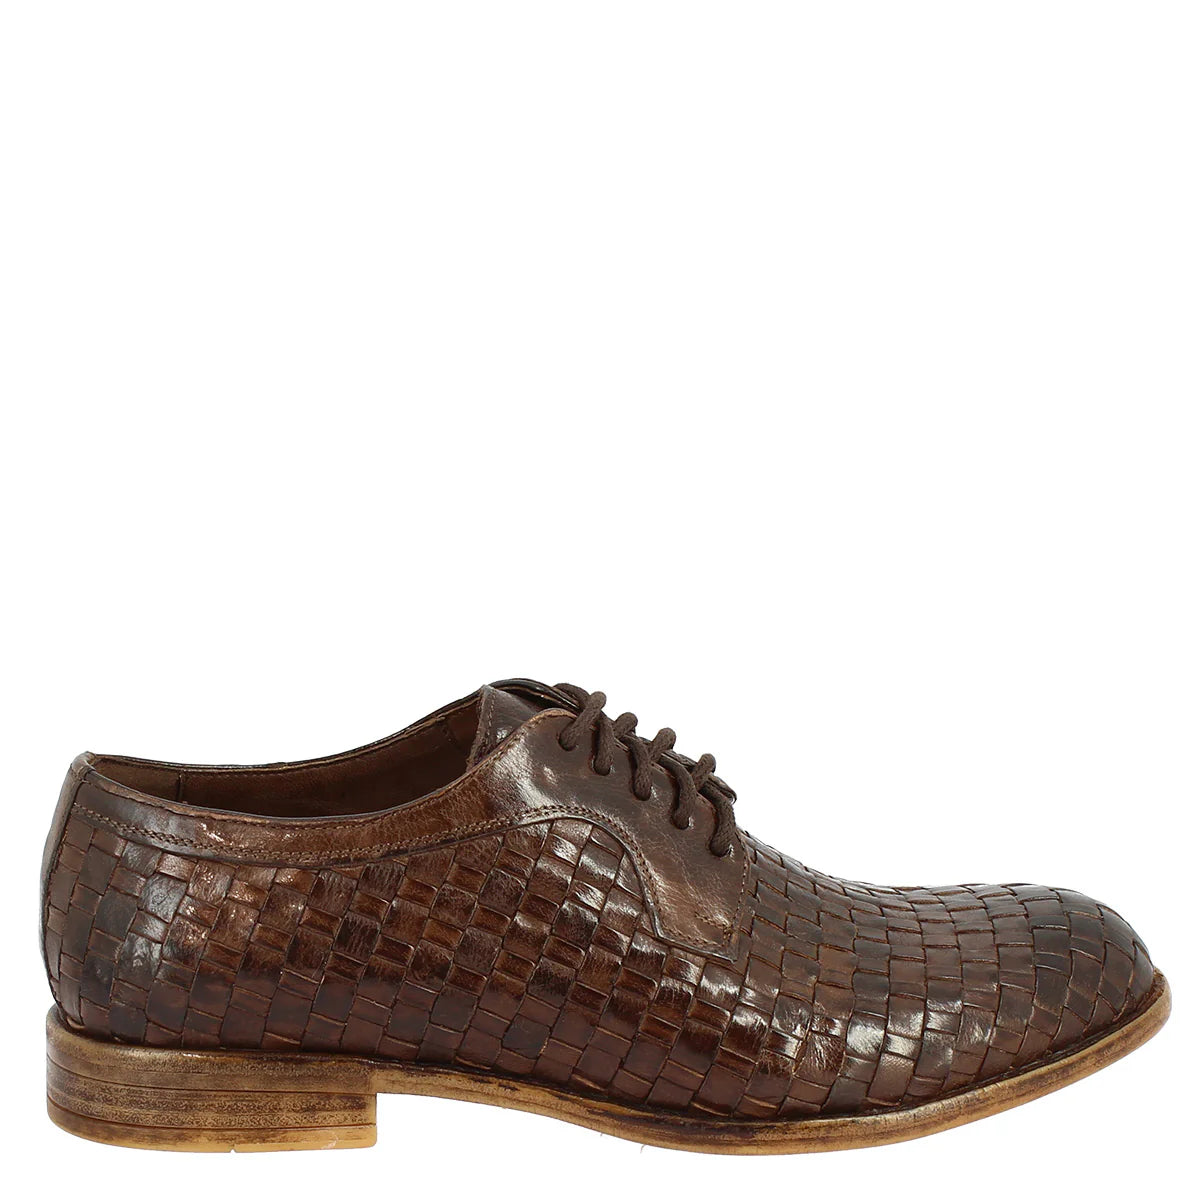 Dark Brown Woven Leather Shoes